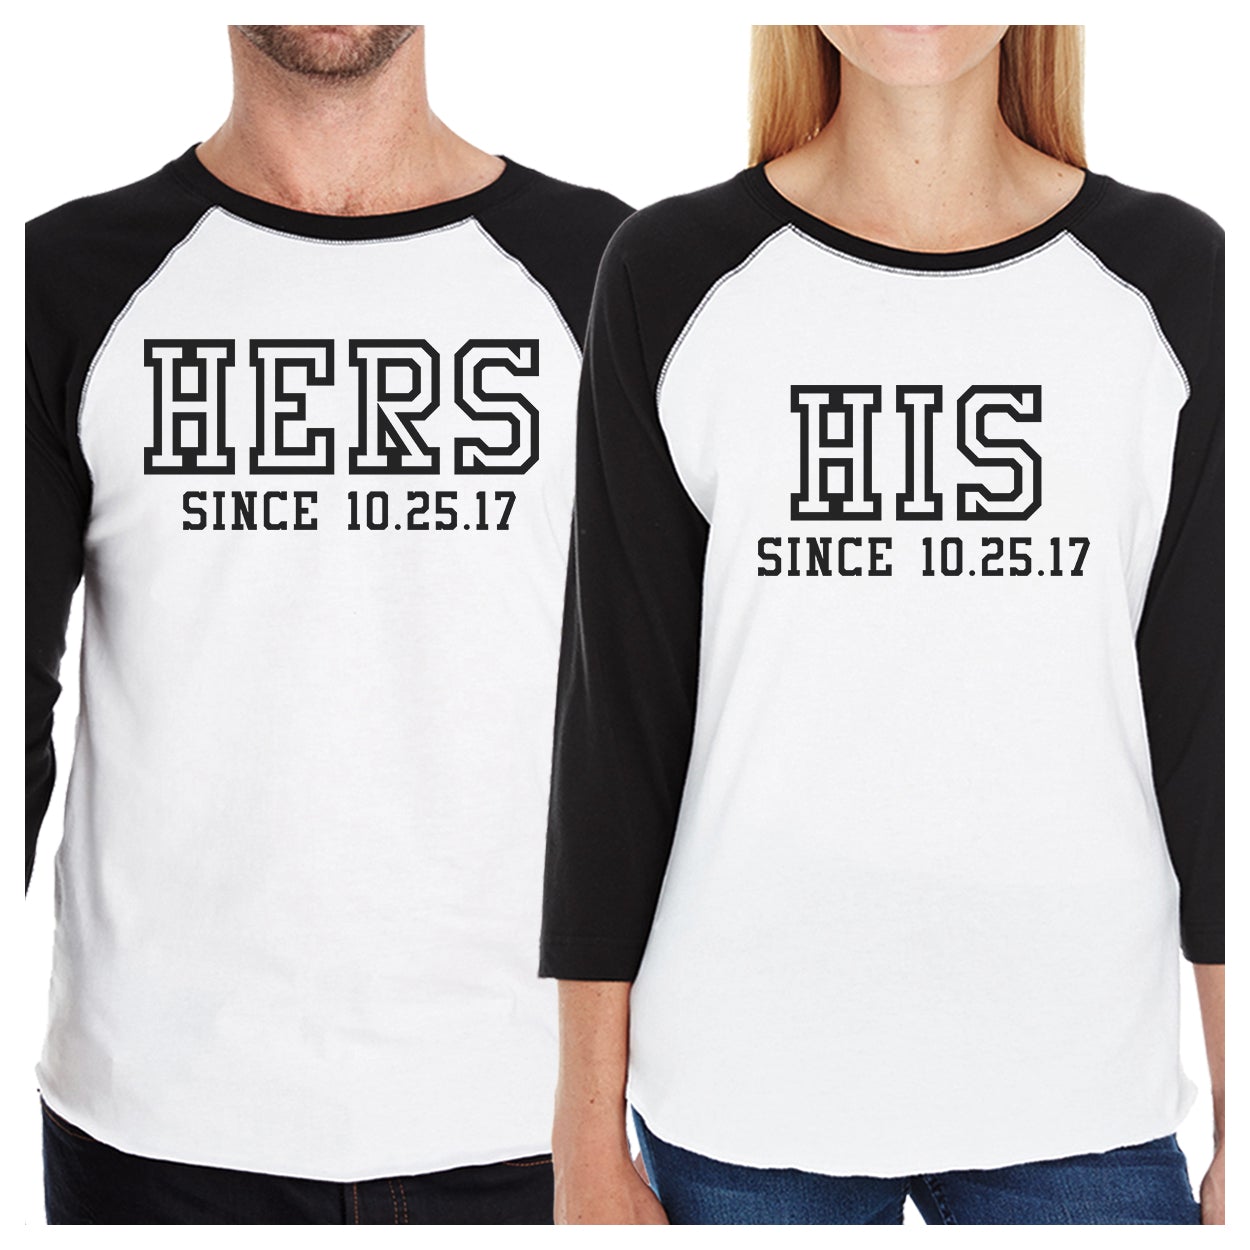 Hers And His Since Custom Matching Couple Black And White Baseball Shirts